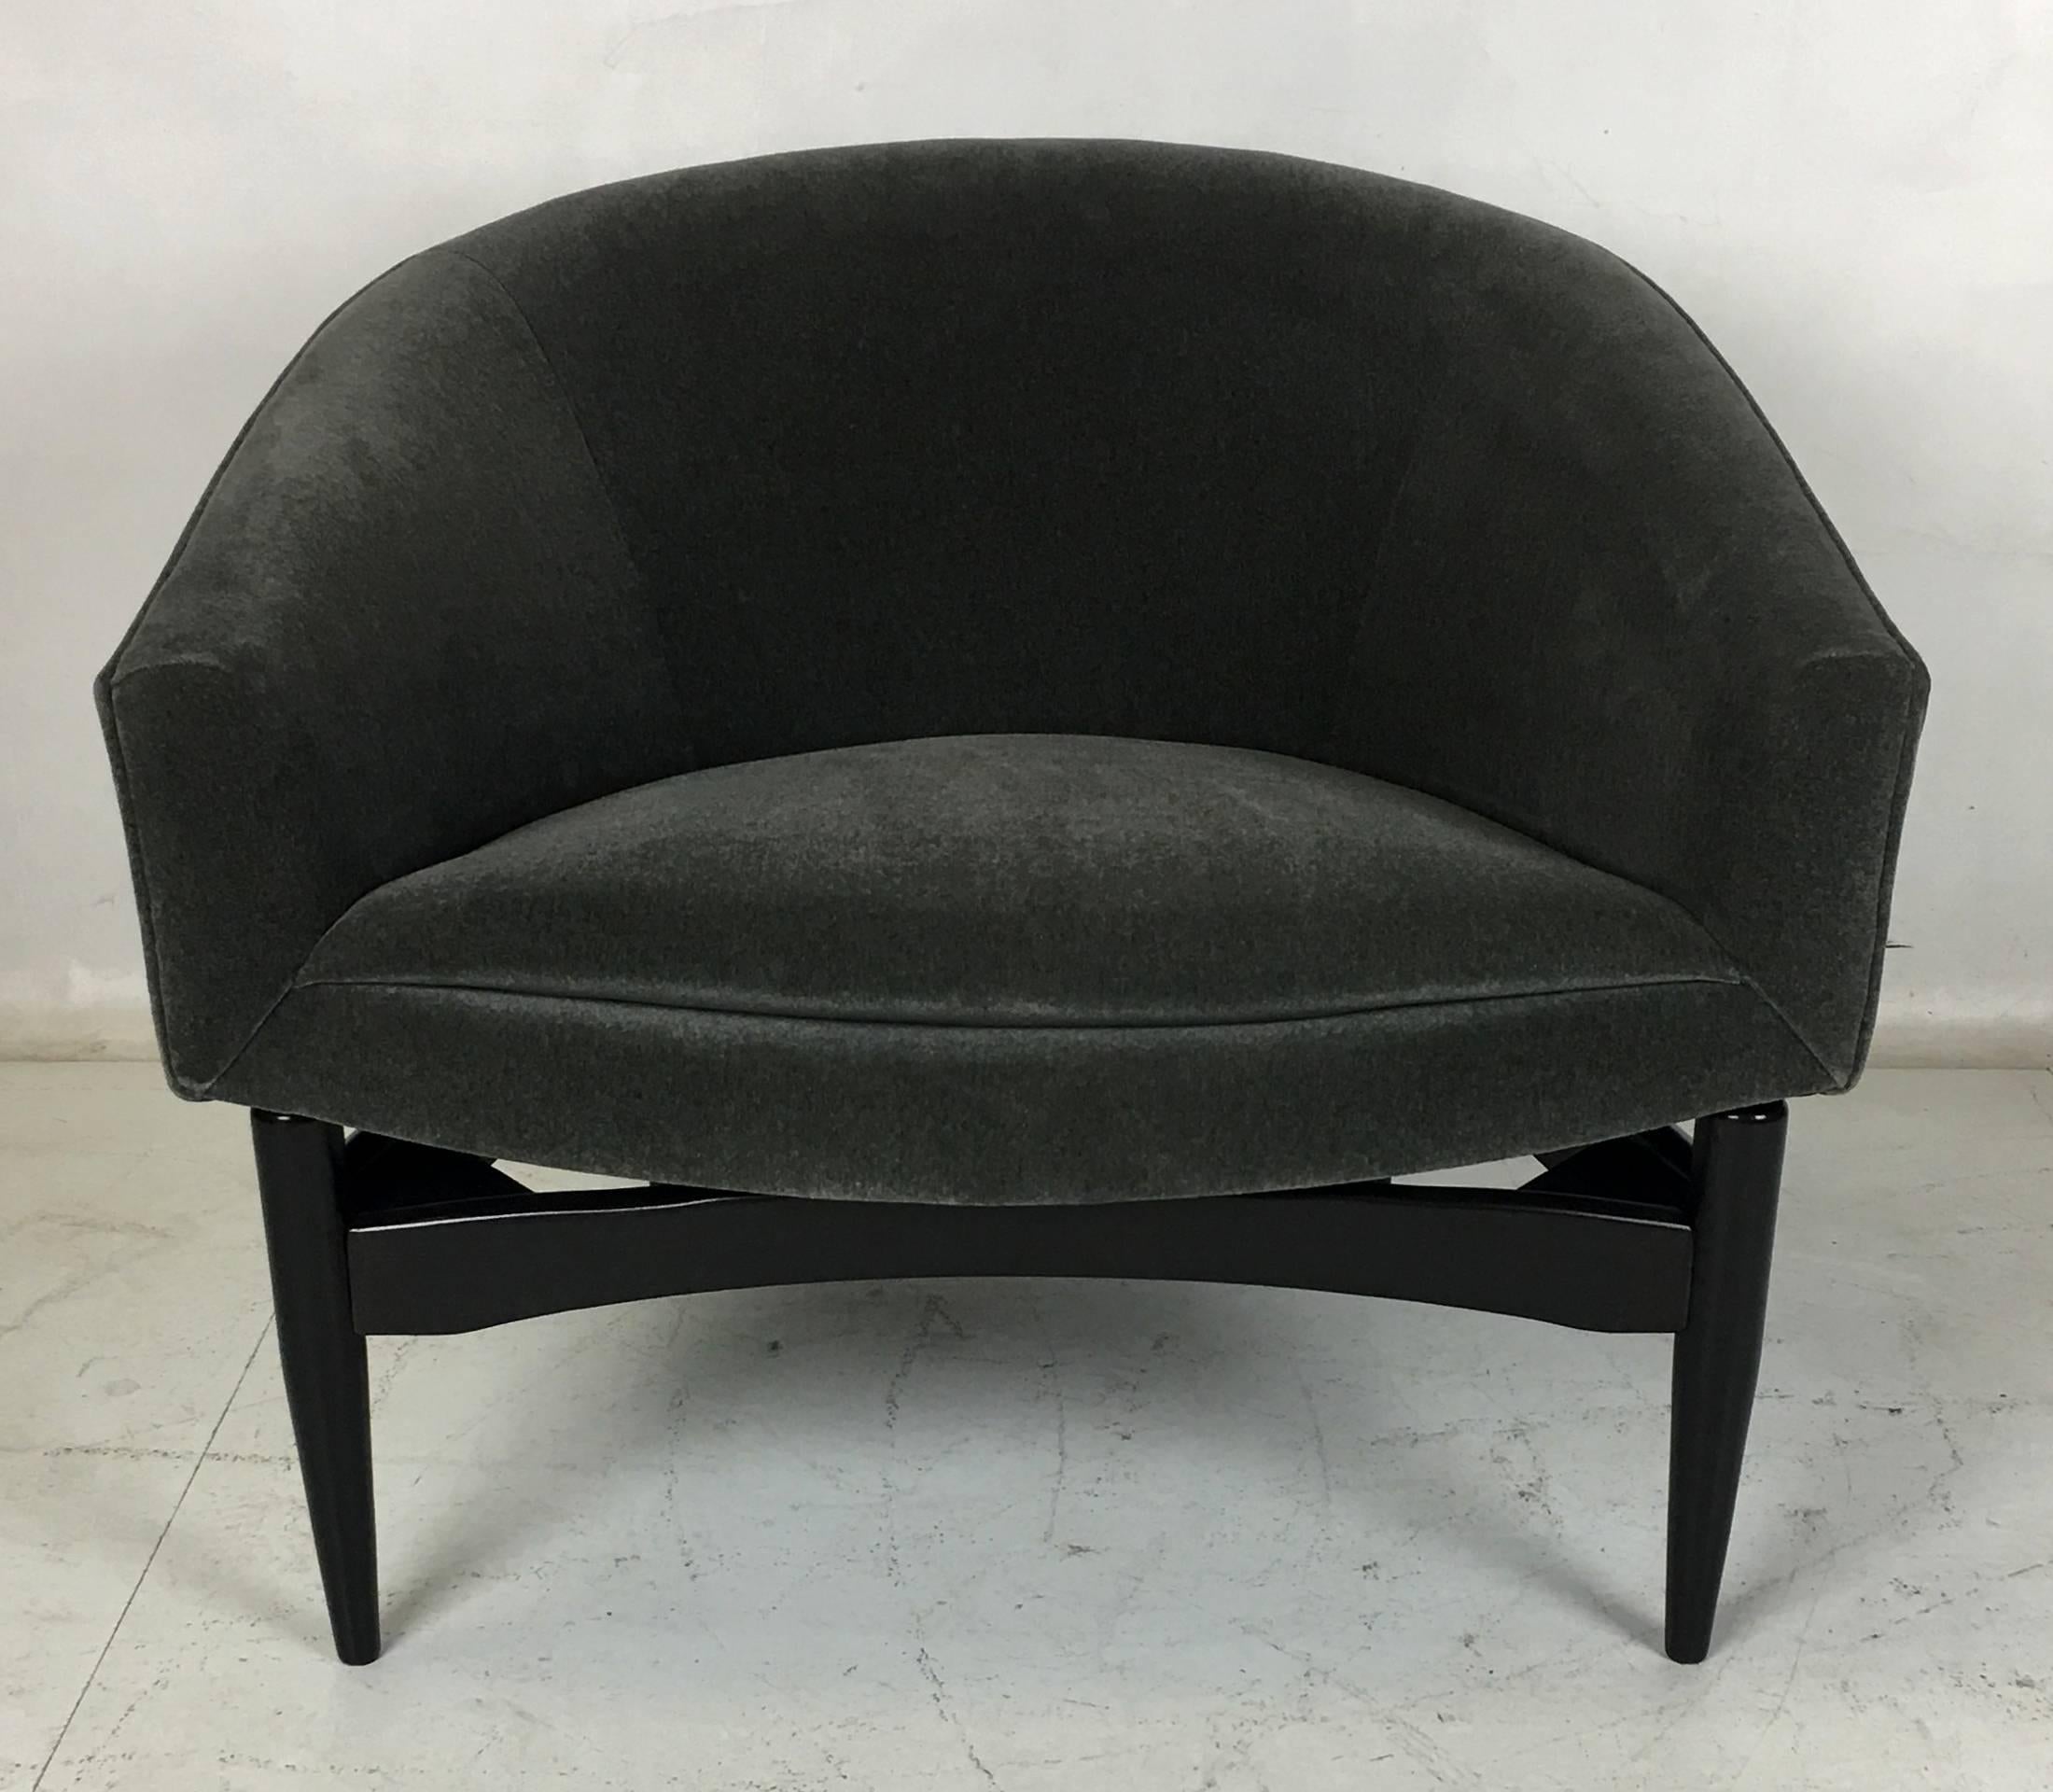 Sensational pair of wide and comfortable Lawrence Peabody Lounge chairs. The pair have been meticulously restored, the bases re-glued and refinished in Ebony lacquer and the chairs have been re-upholstered in luxurious heavyweight Charcoal Grey